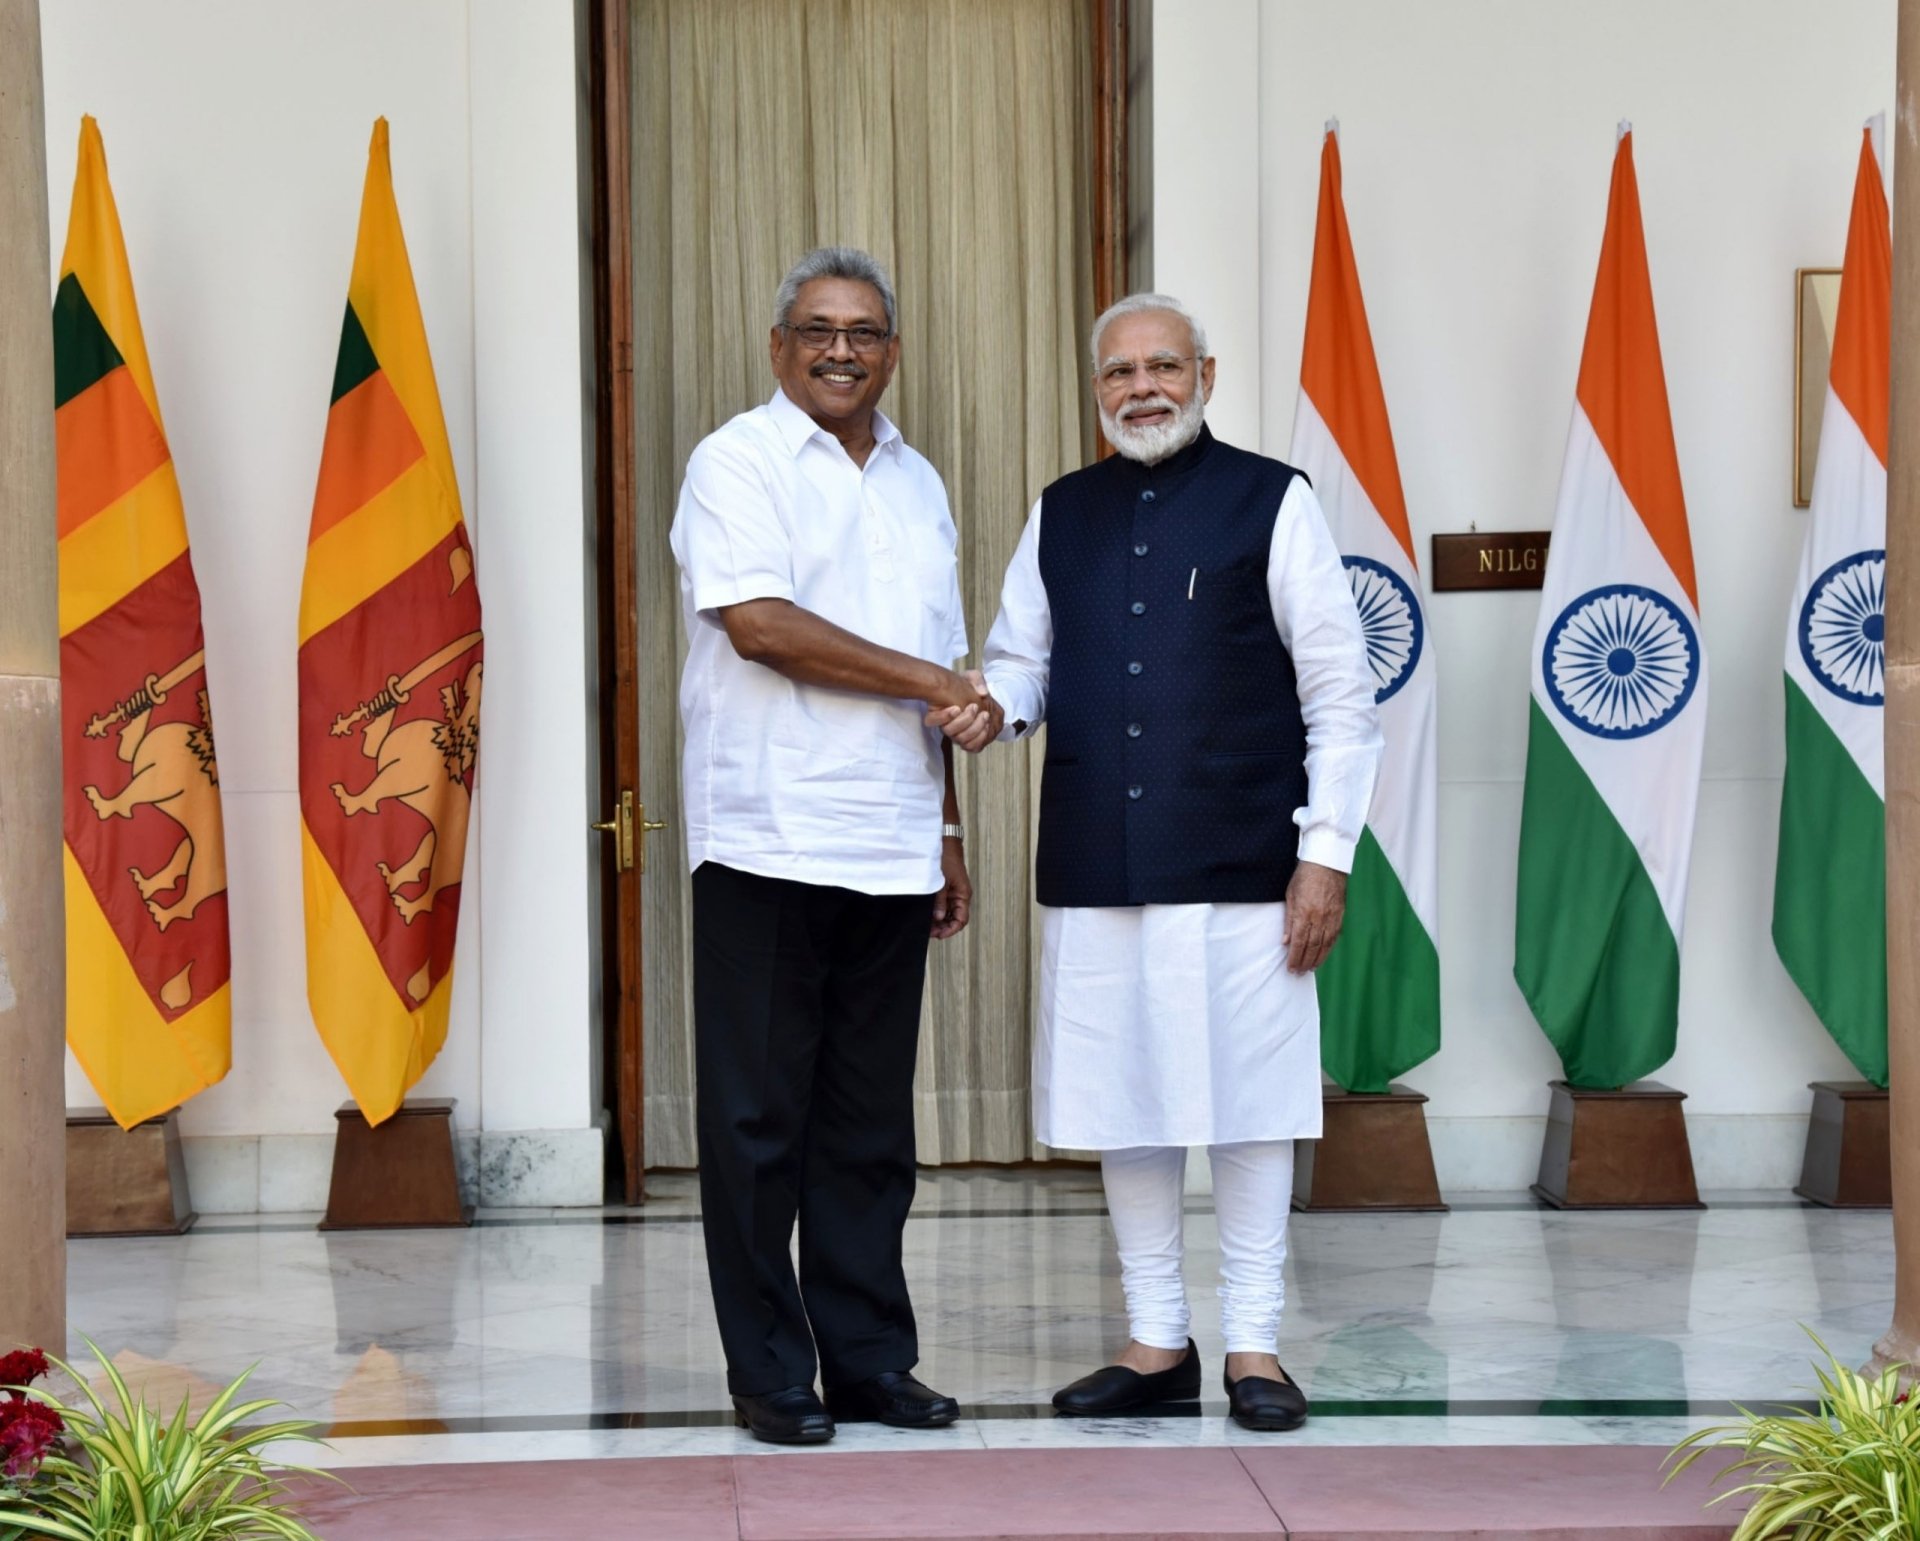 President Rajapaksa and PM Modi shaking hands in front of the flags of Sri Lanka and India